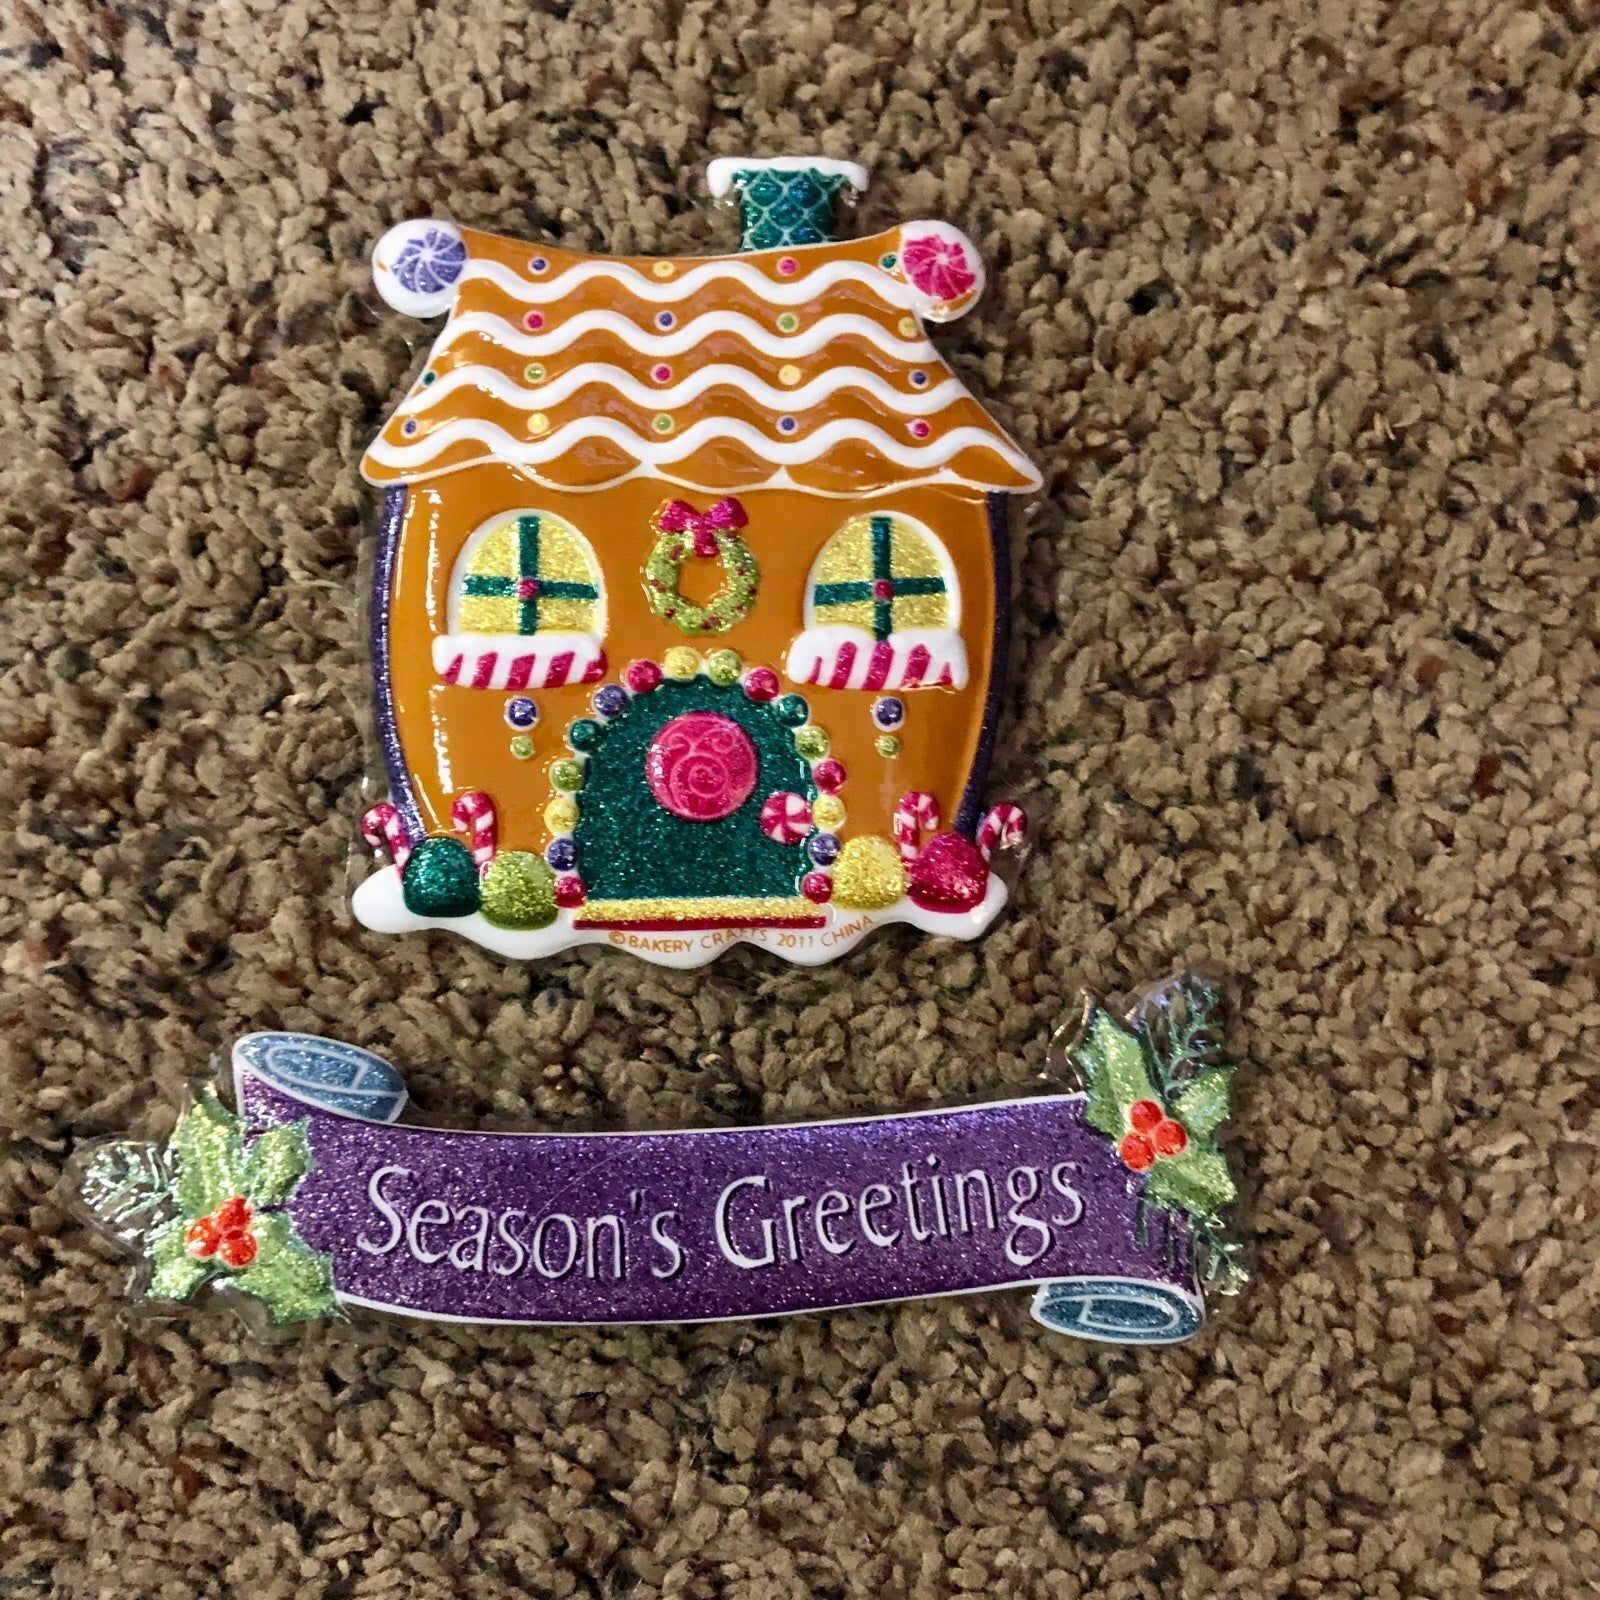 Two Christmas Pop Tops Cake Decorations Gingerbread House Seasons Greetings Used - $15.00